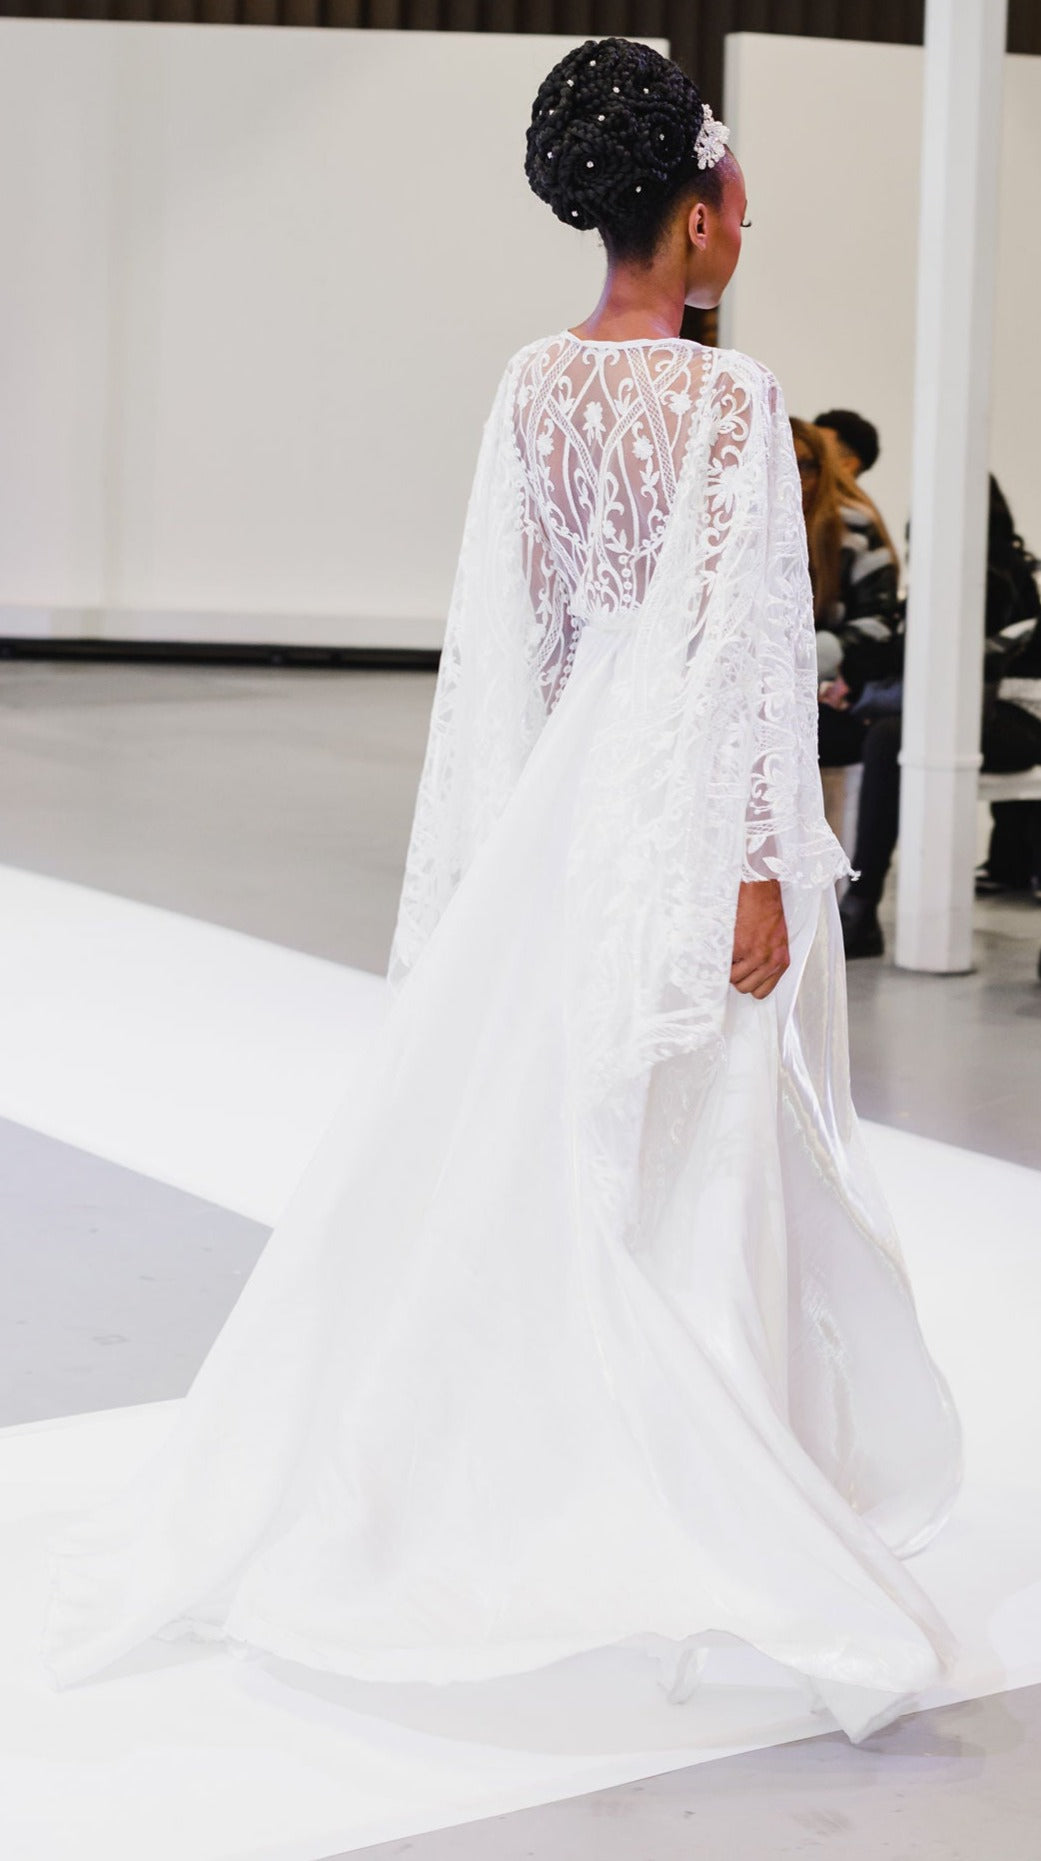 Seraphina Lace Bridal Robe with Lace Circle Sleeves